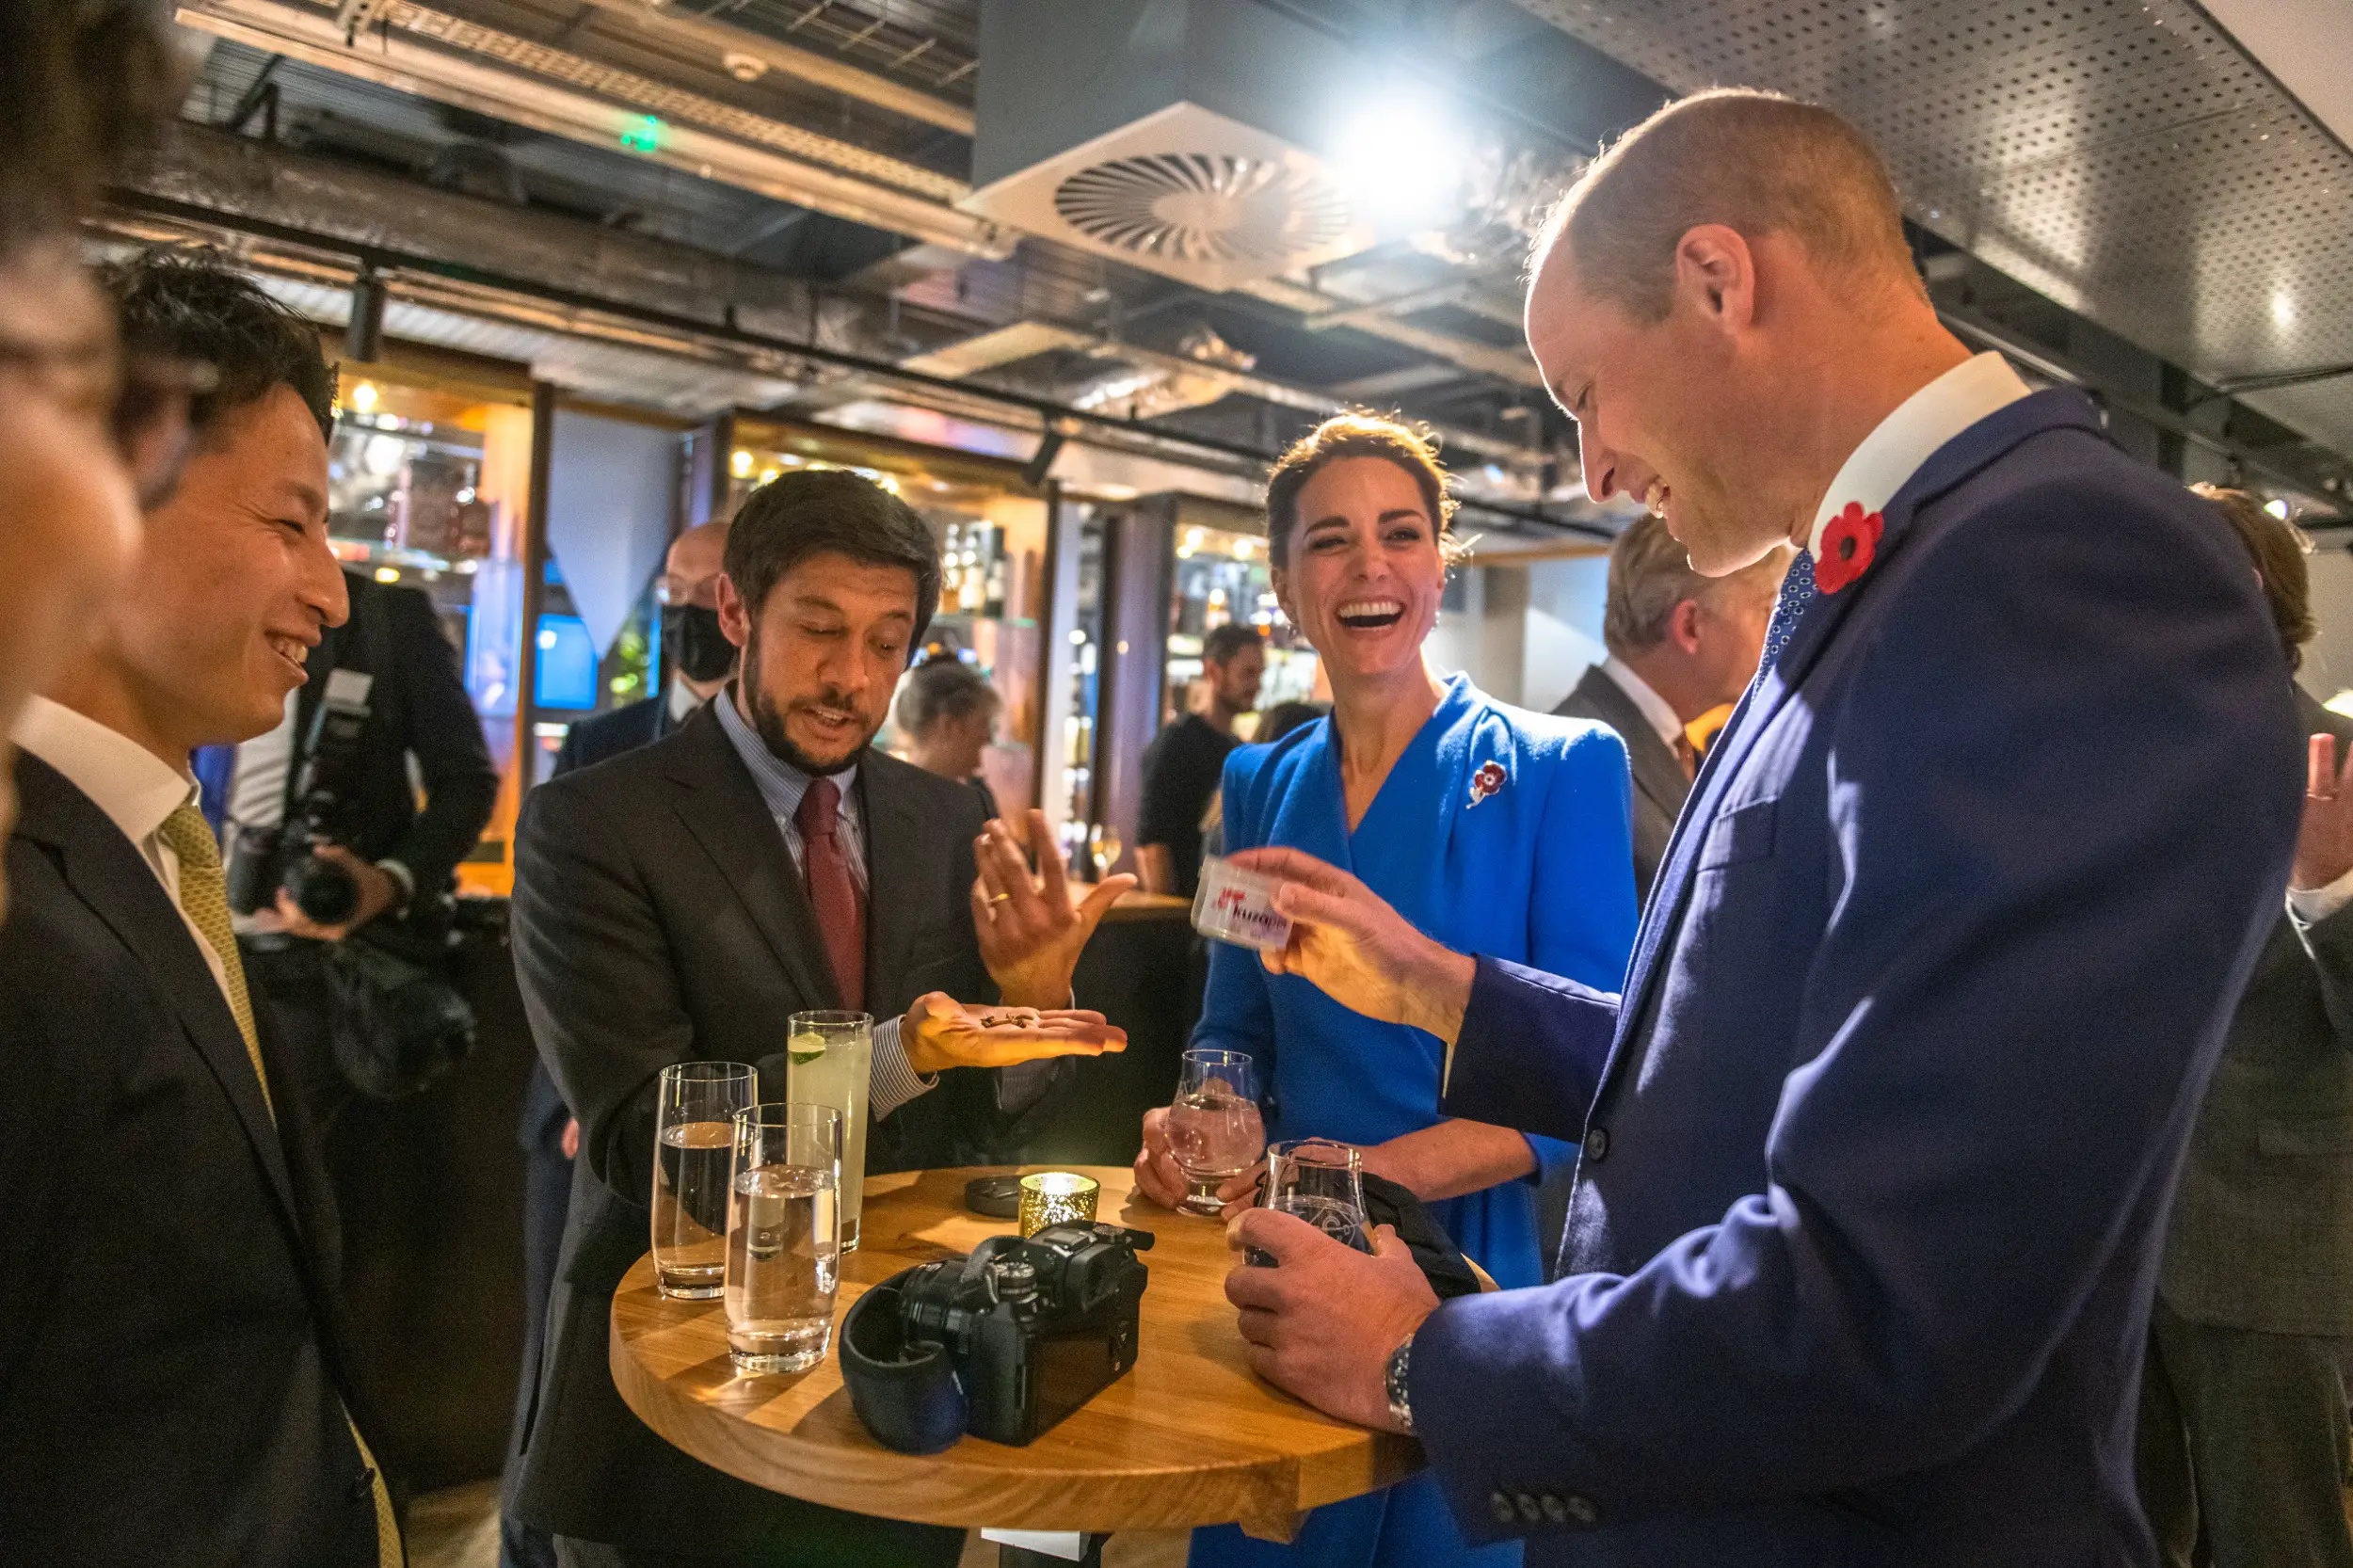 The Duke and Duchess of Cambridge joined the Prince of Wales, The Duchess of Cornwall and the world leaders at the Clydeside Distillery for a reception